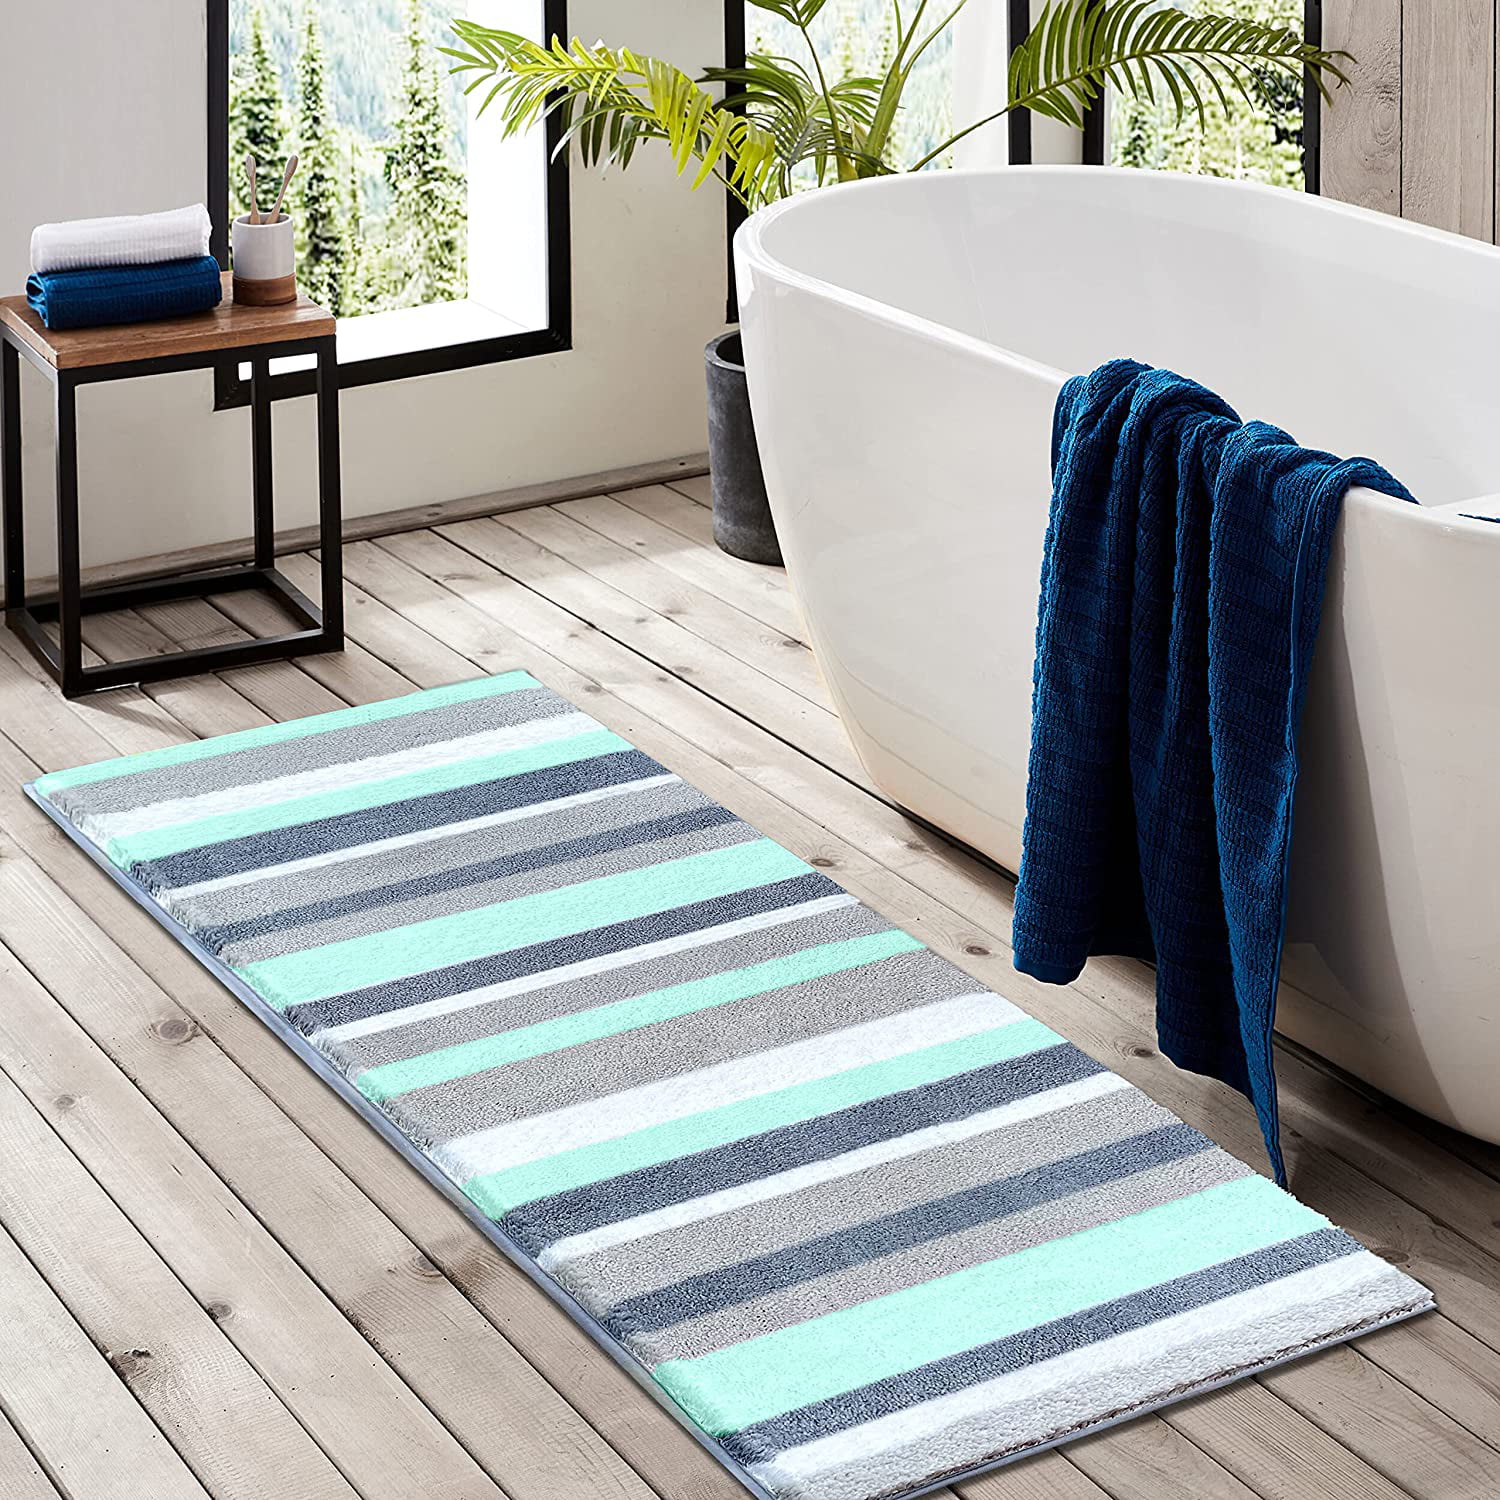 16'' x 24'' + 16'' x 24'', Purple and White Shower 2 Pieces Ultra Soft and Water Absorbent Bath Rug Bath Carpet for Tub Bathroom Rugs and Mats Sets Machine Wash/Dry and Bath Room